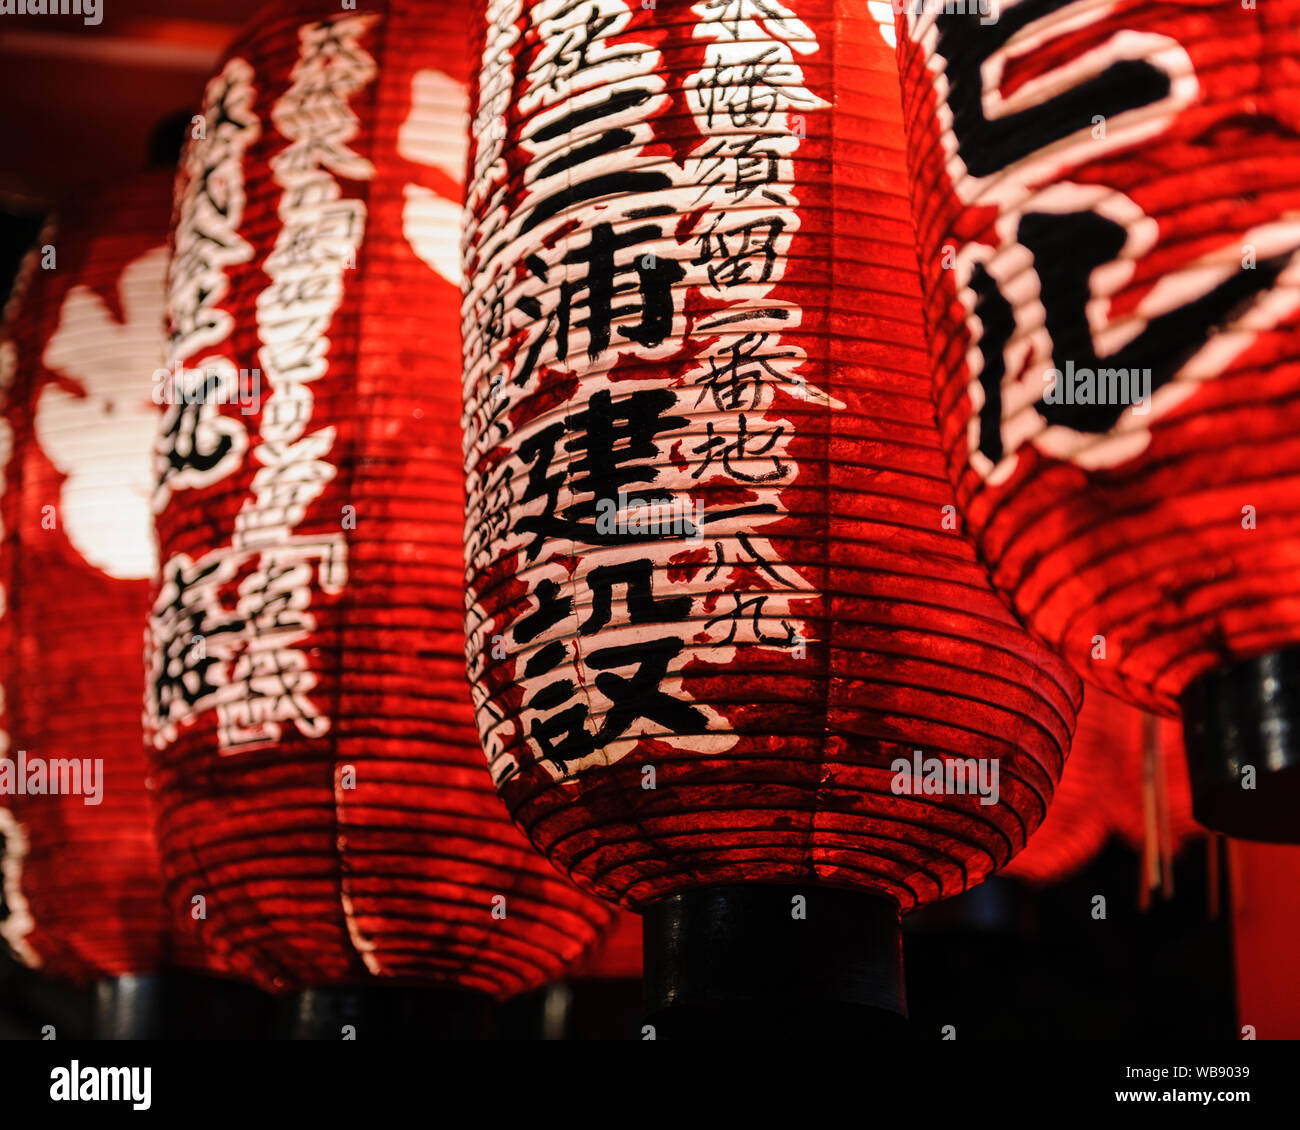 Traditional japanese Lanterns made from paper reavealing in abstract pattern with handwritten japanese Kanji characters, Kyoto Japan November 2018 Stock Photo